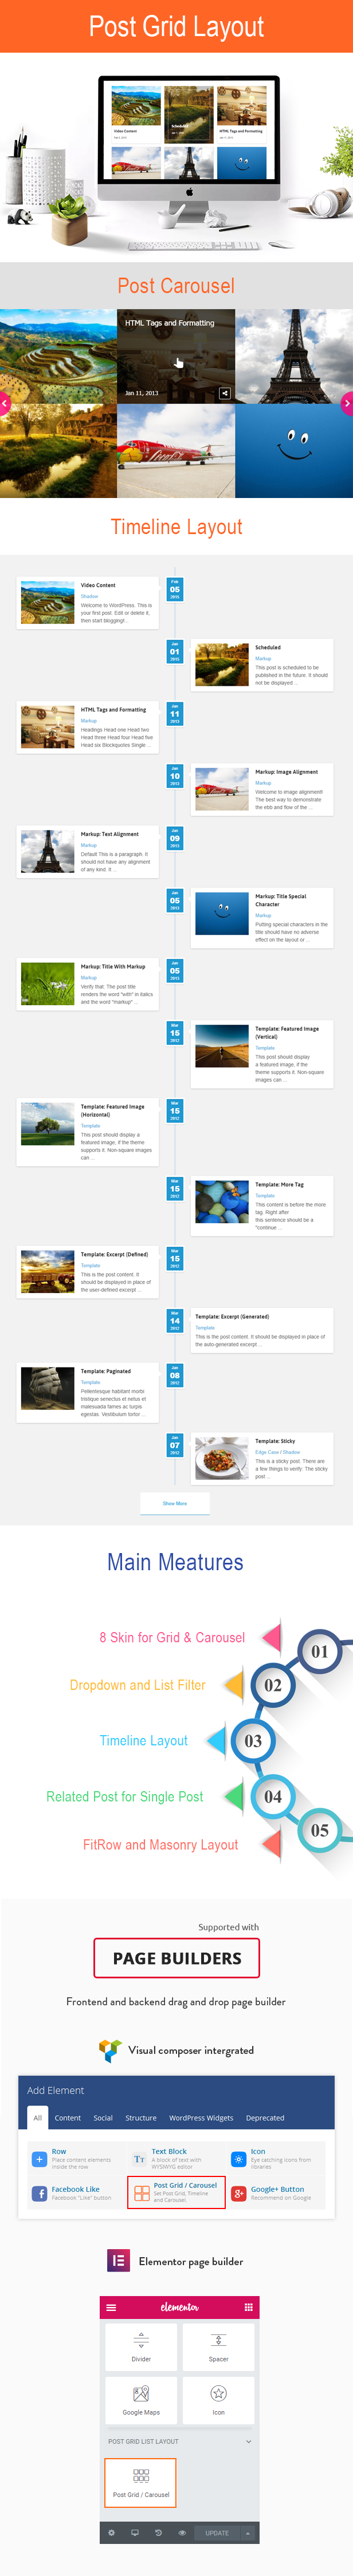 Wordpress Post Grid / List / Timeline Layout With Carousel & Related Post